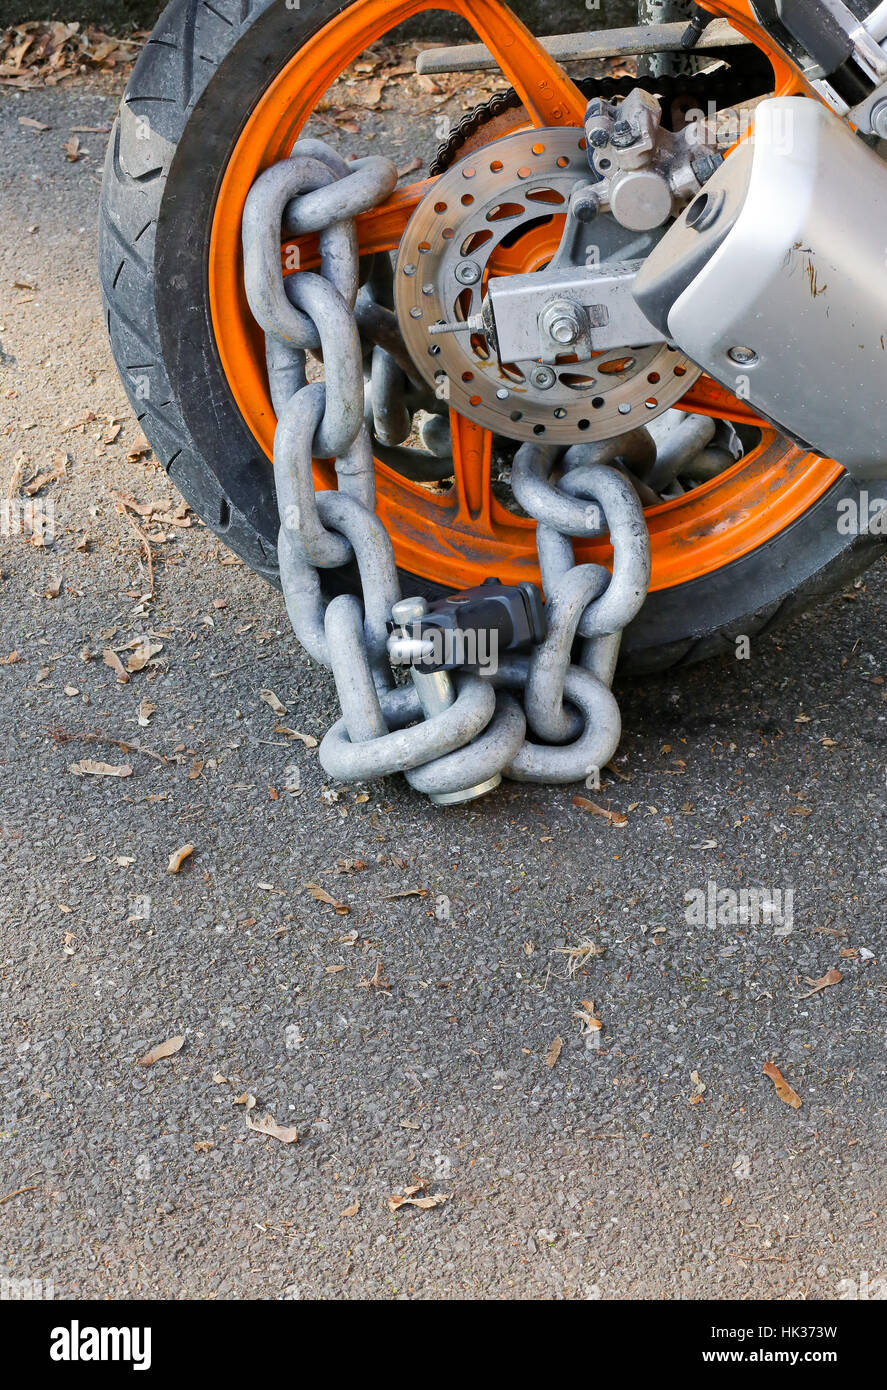 Motorcycle anti-theft chain with padlock security lock on rear wheel, protection against theft Stock Photo